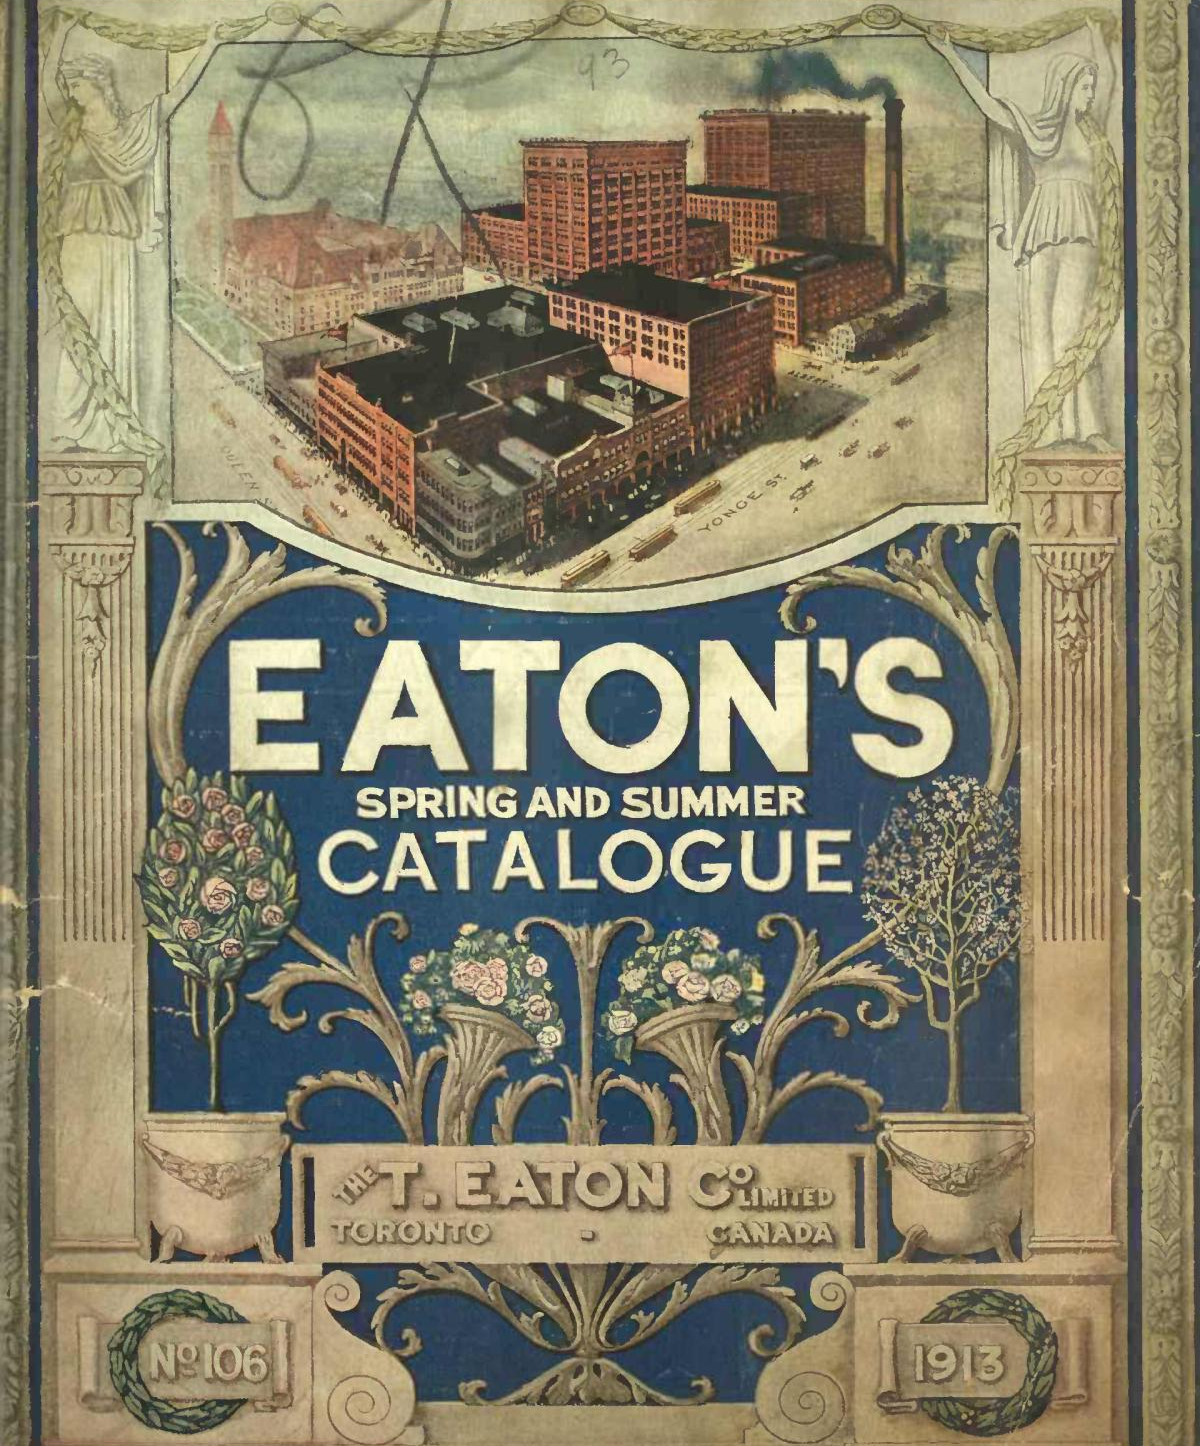 Vintage cover of Eaton's trade catalogue